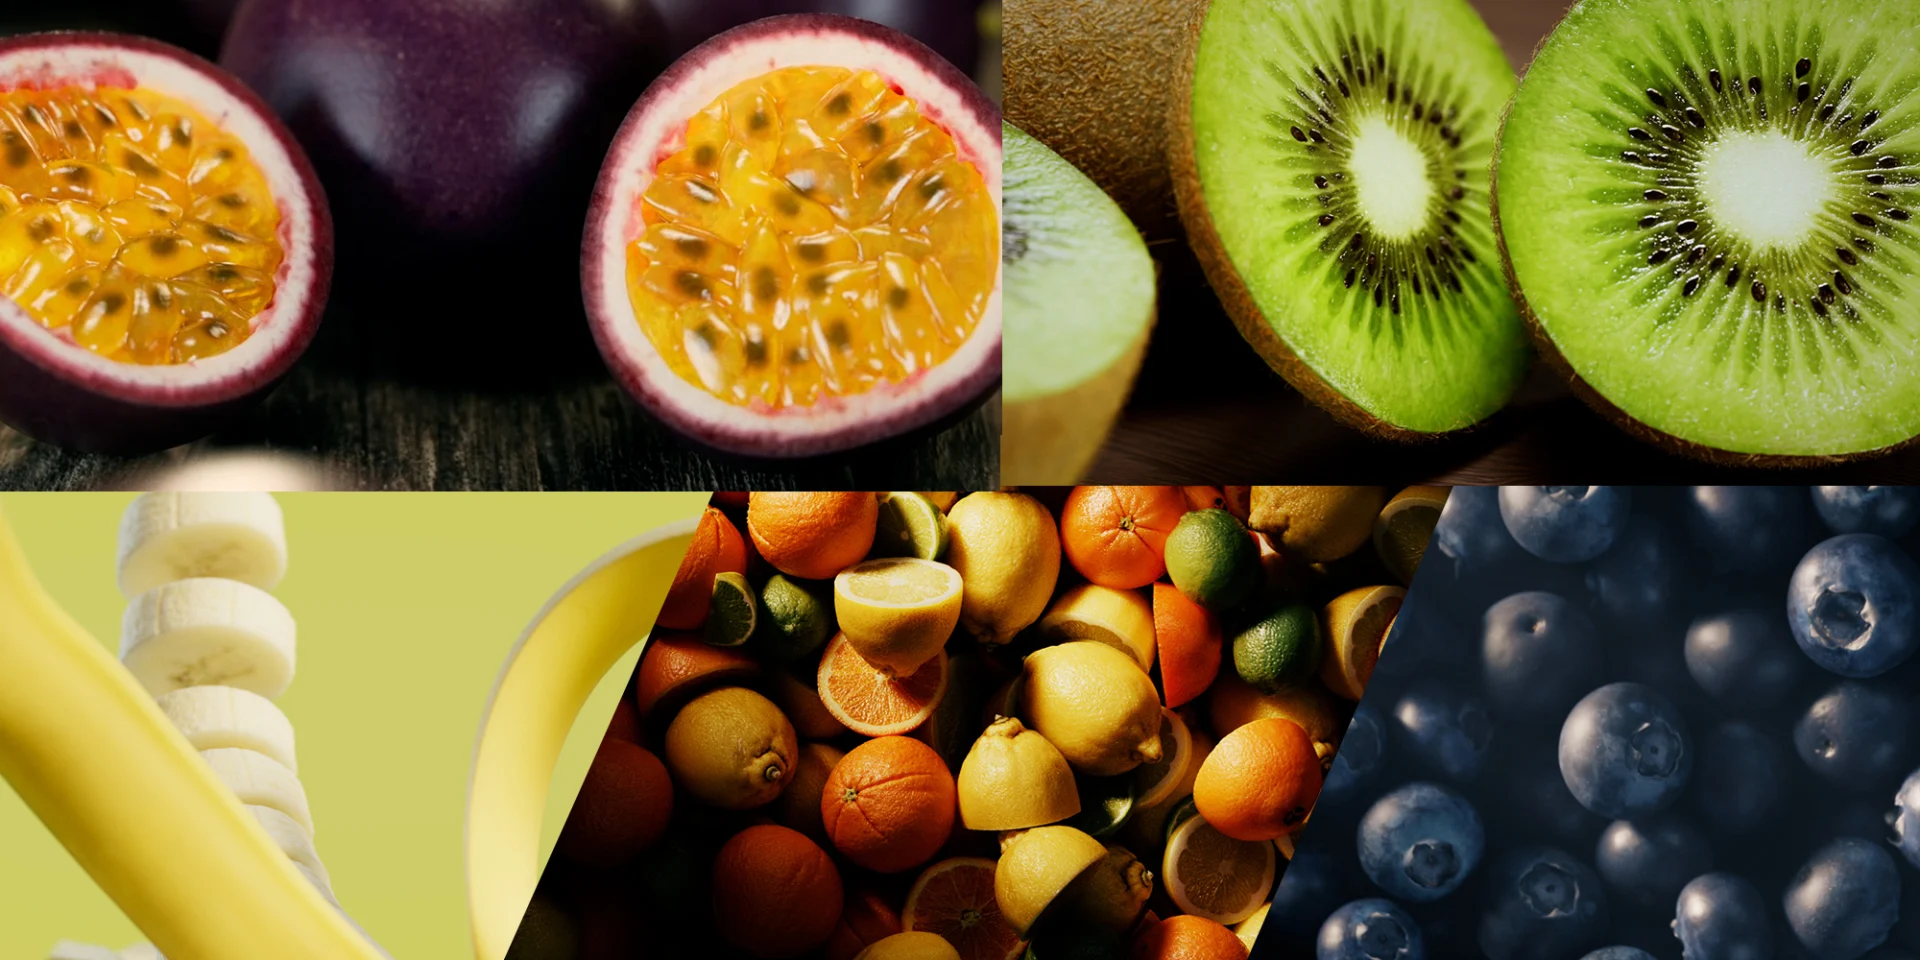 a composition out of several fruits. showing a passion fruit, a kiwi, a banana, lemon fruits and blueberries